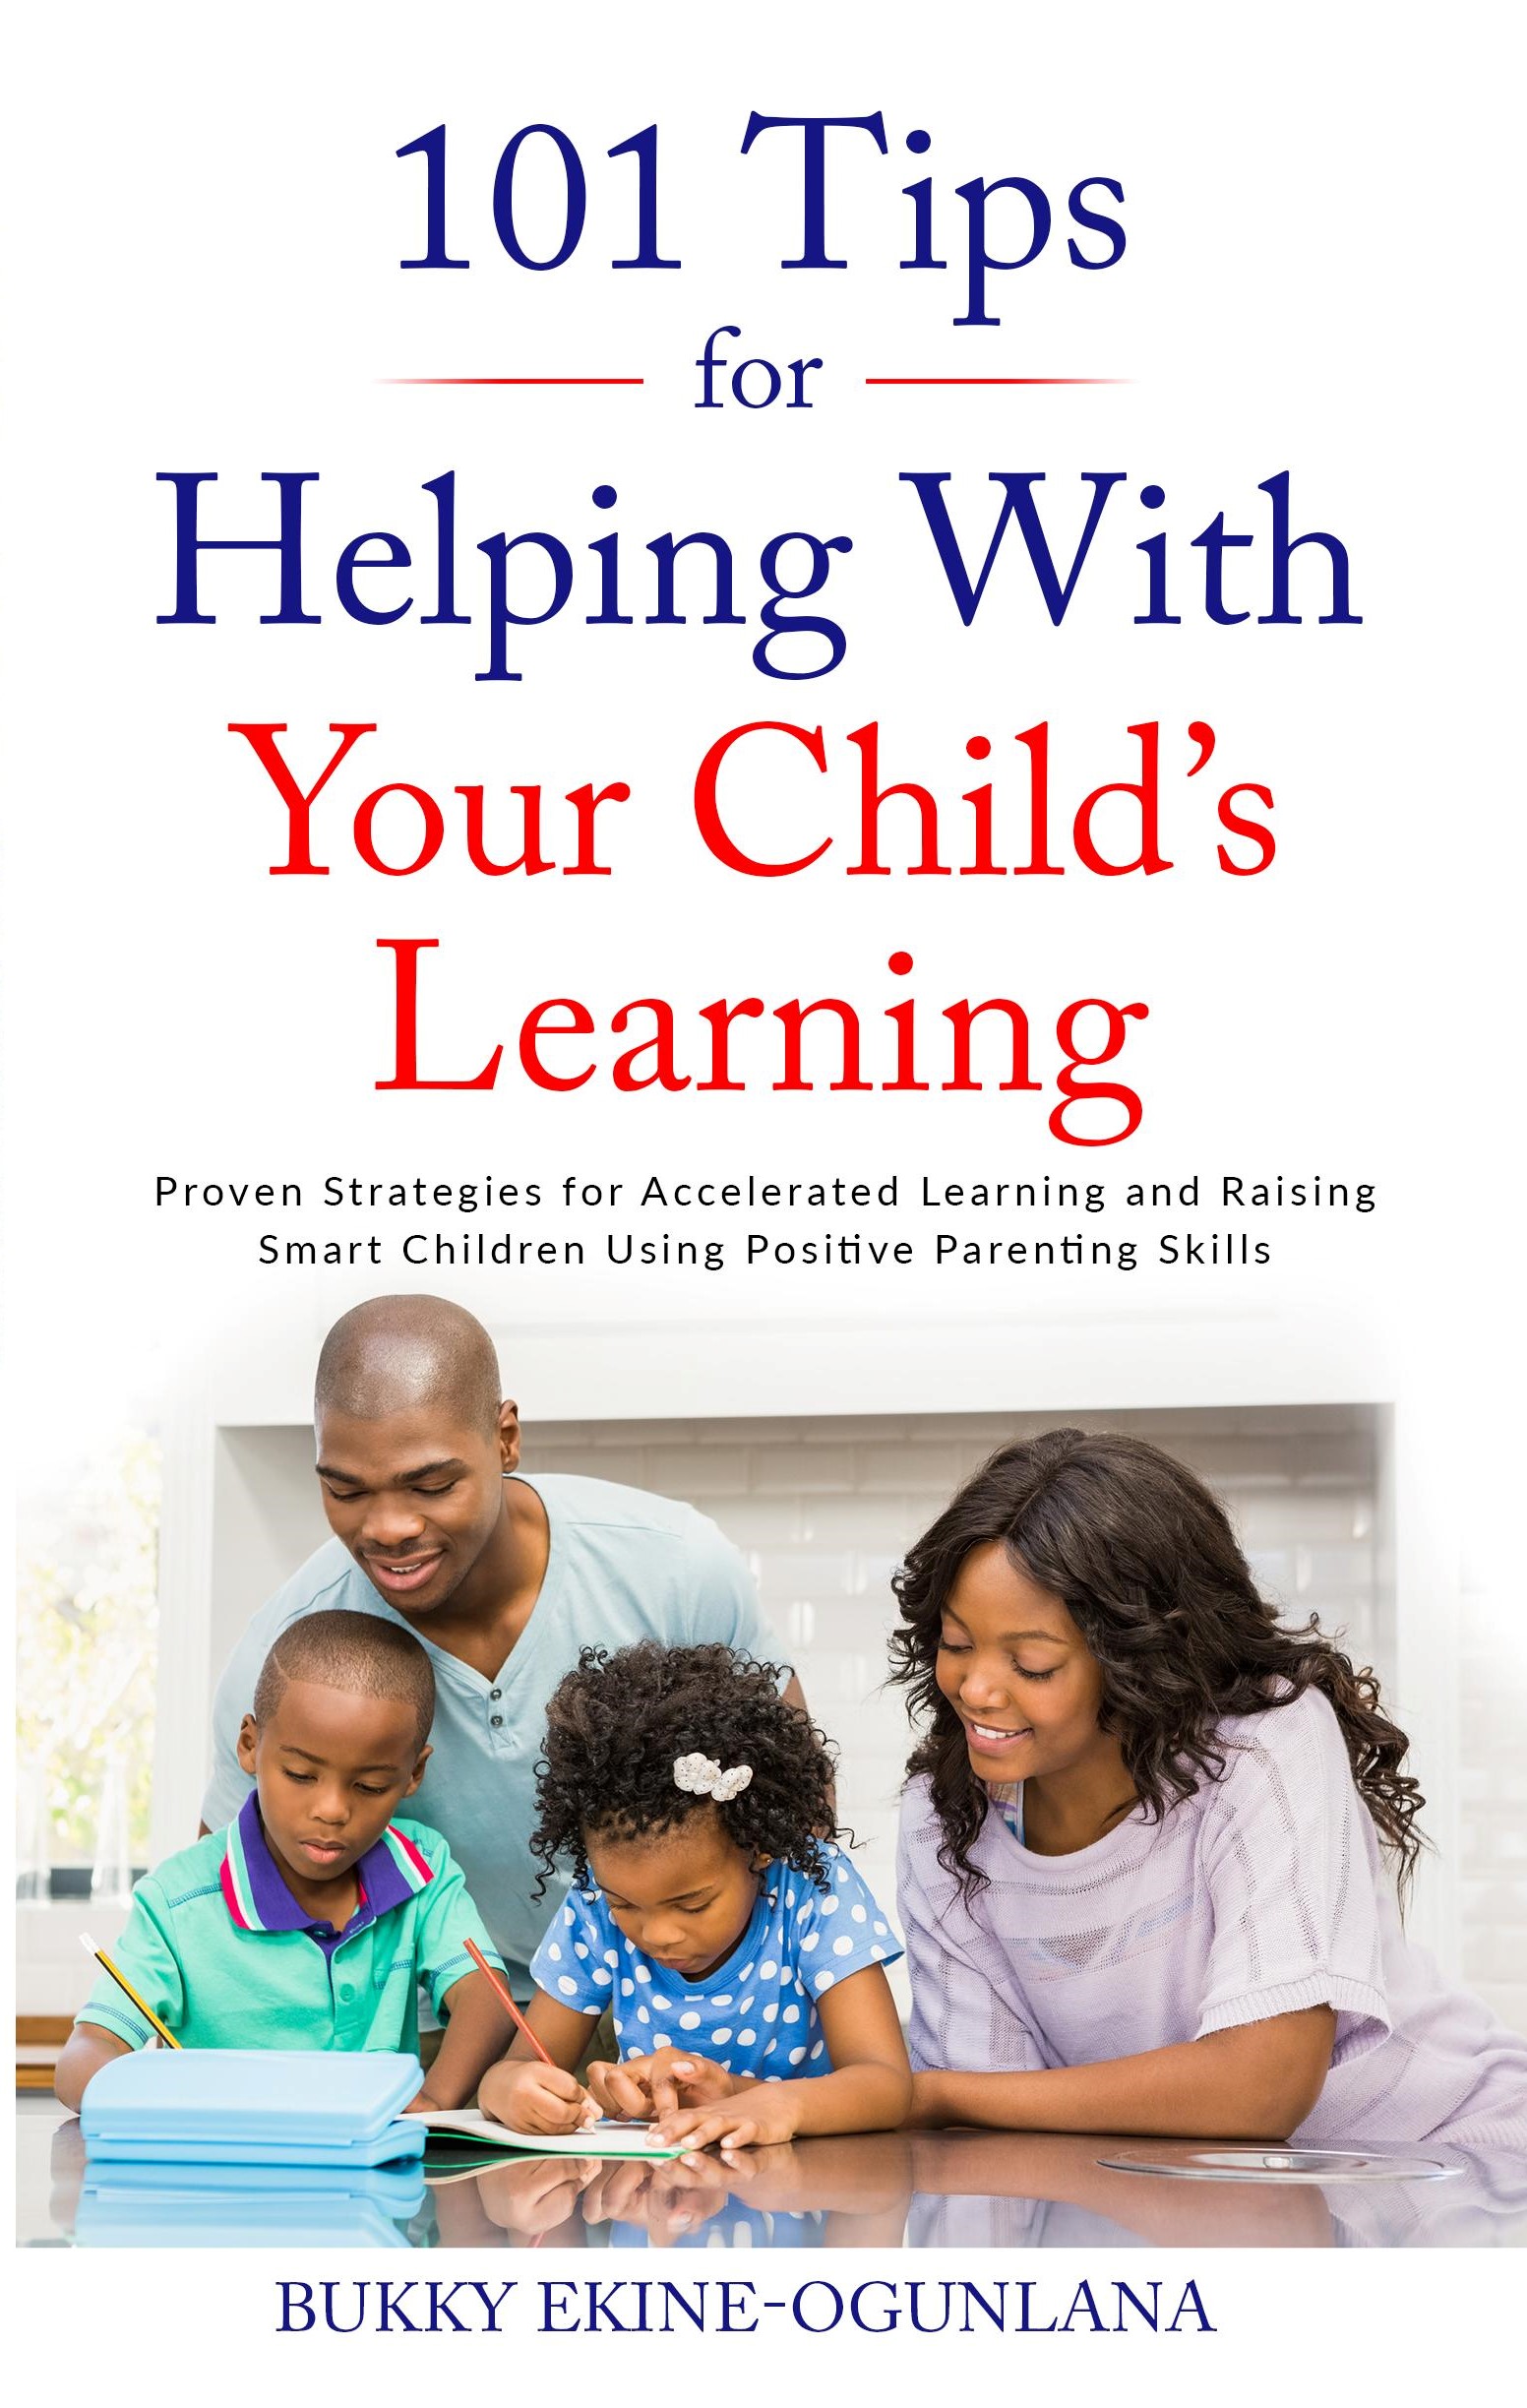 FREE: 101 Tips For Helping With Your Child’s Learning: Proven Strategies for Accelerated Learning and Raising Smart Children Using Positive Parenting Skills by Bukky Ekine-Ogunlana